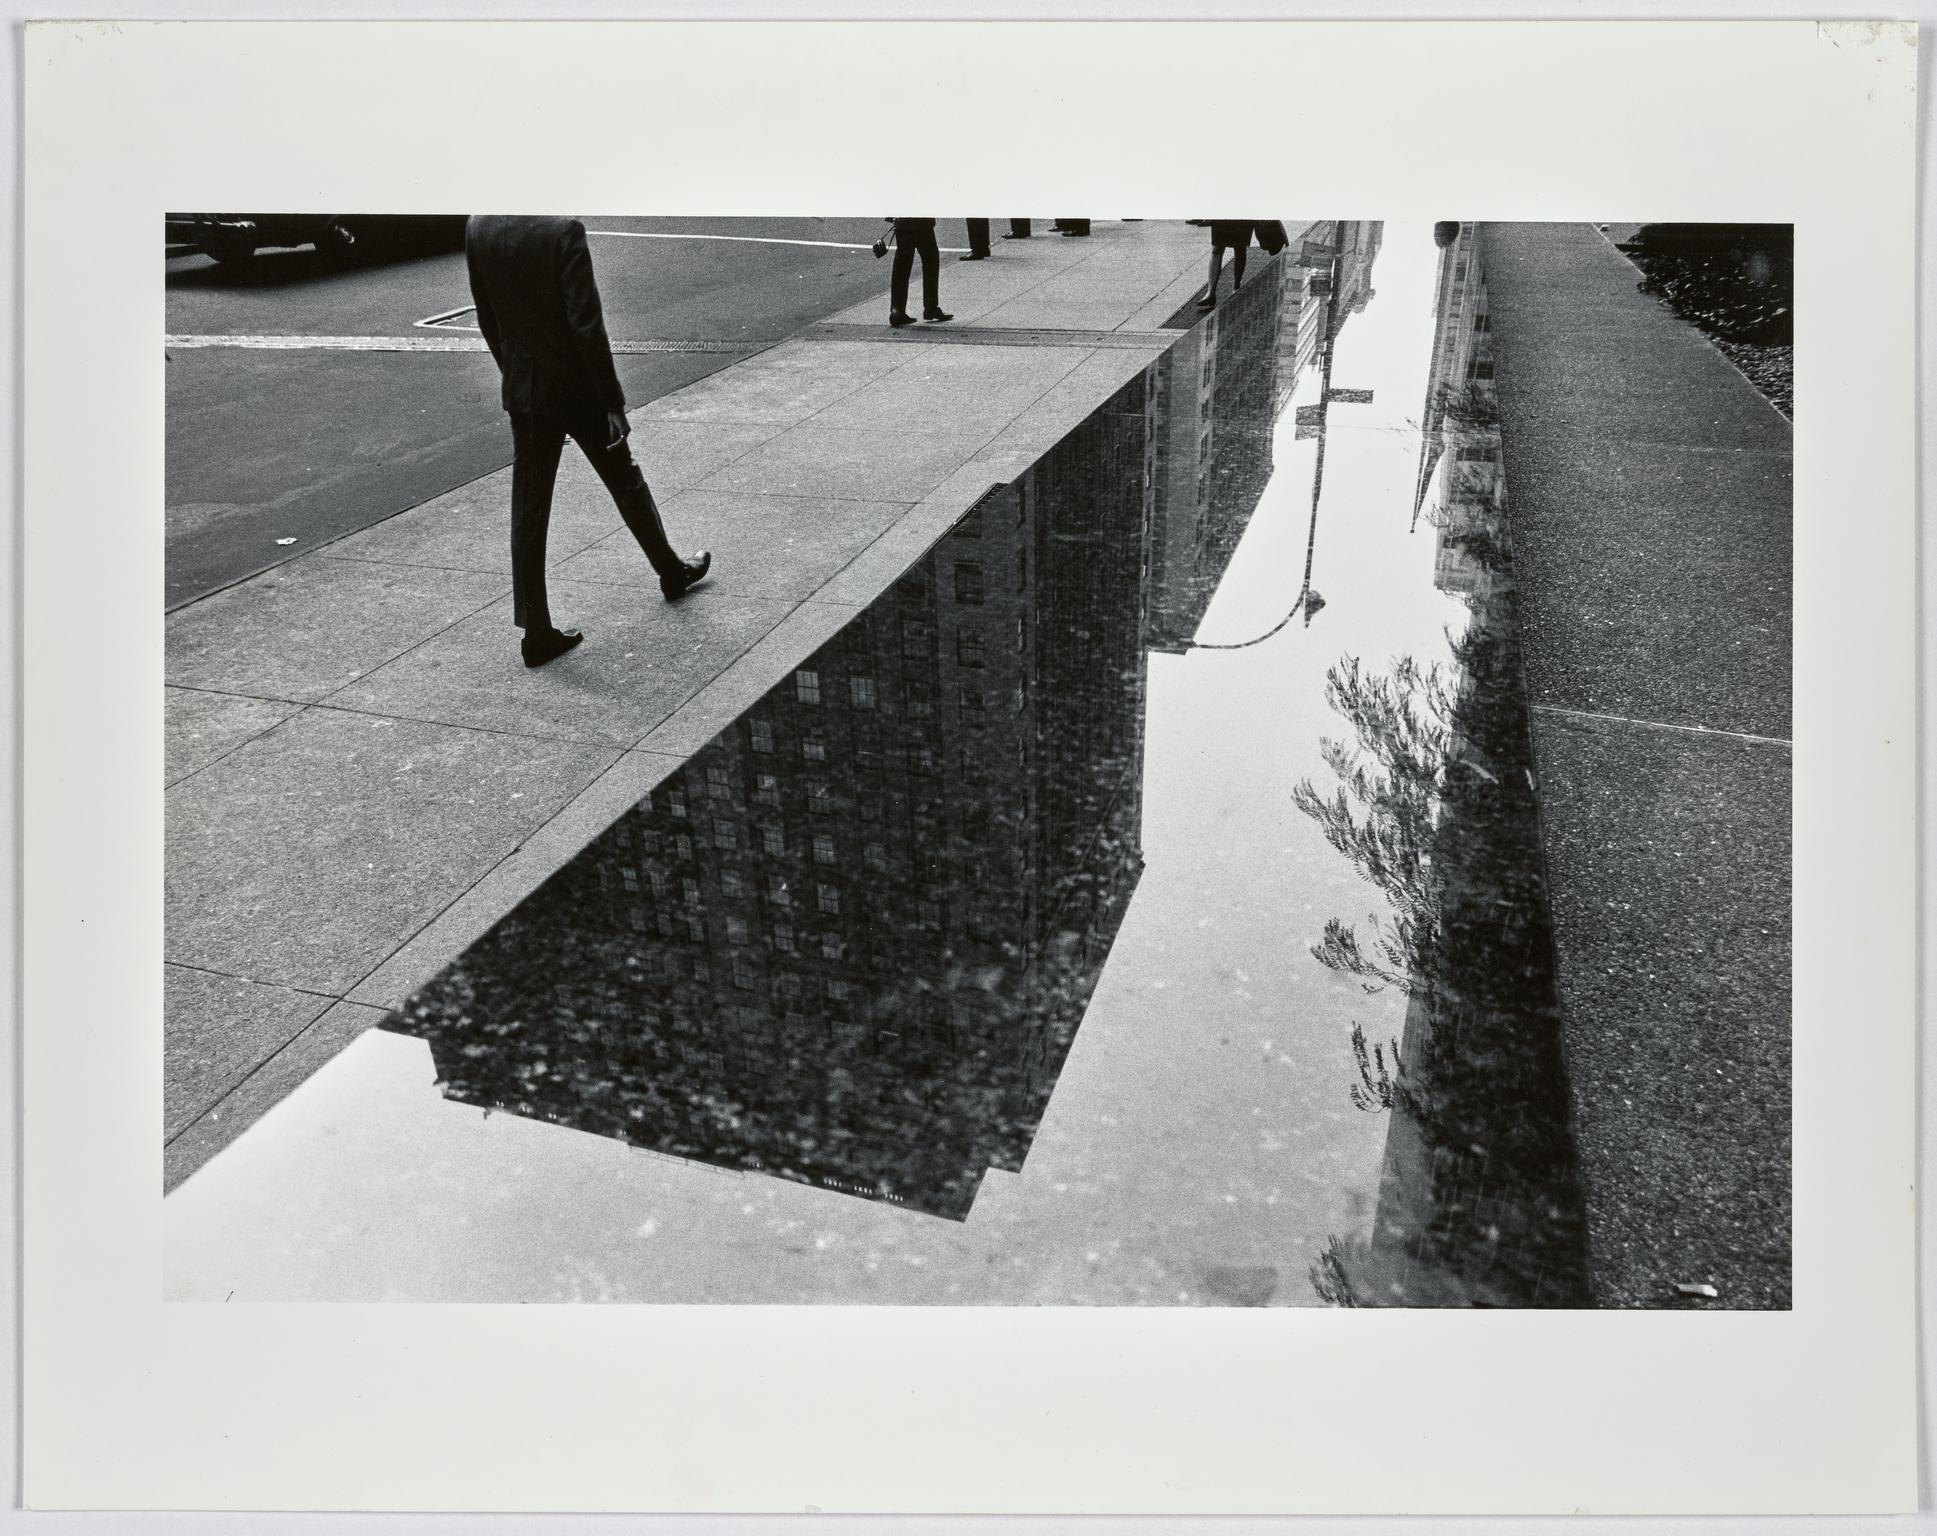 Reflection in marble, Park Avenue, New York